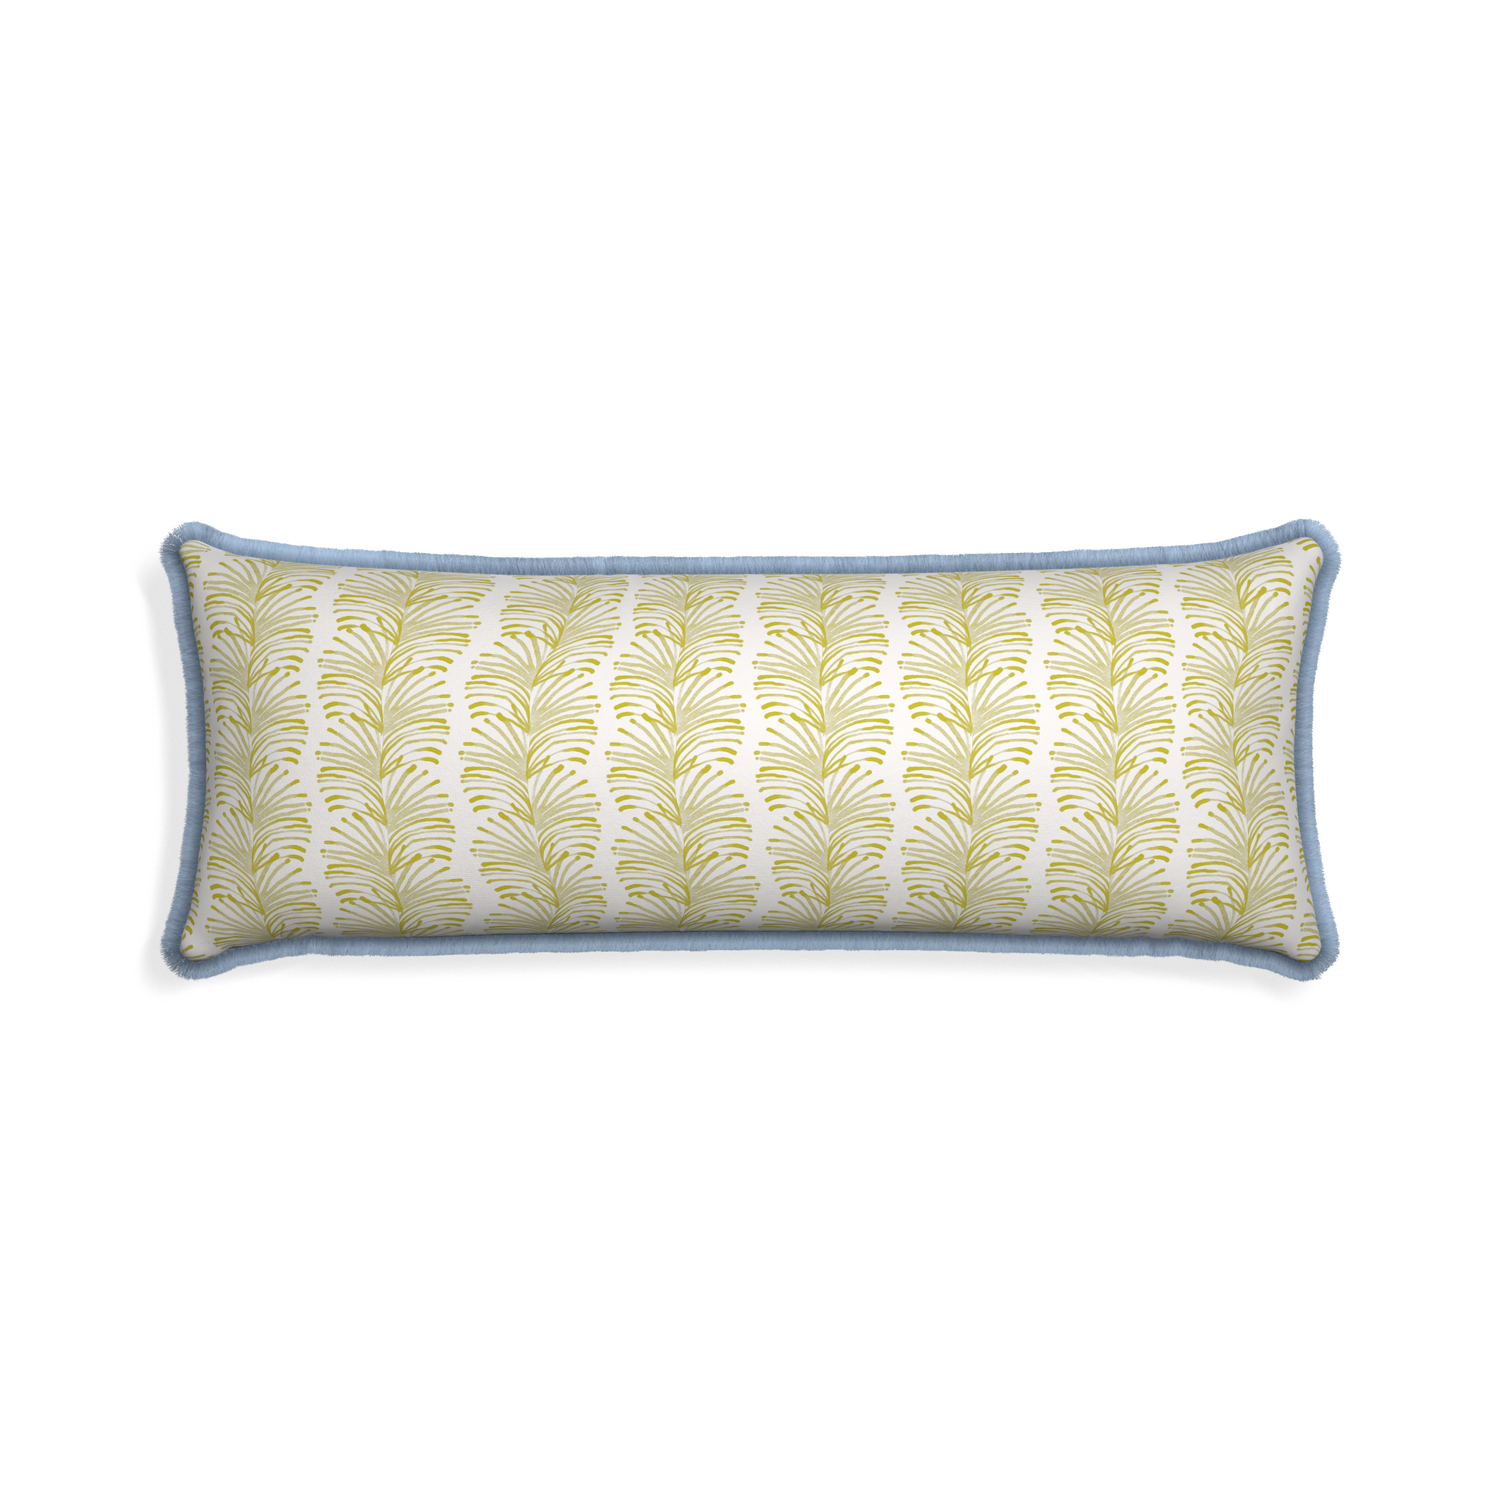 Xl-lumbar emma chartreuse custom yellow stripe chartreusepillow with sky fringe on white background